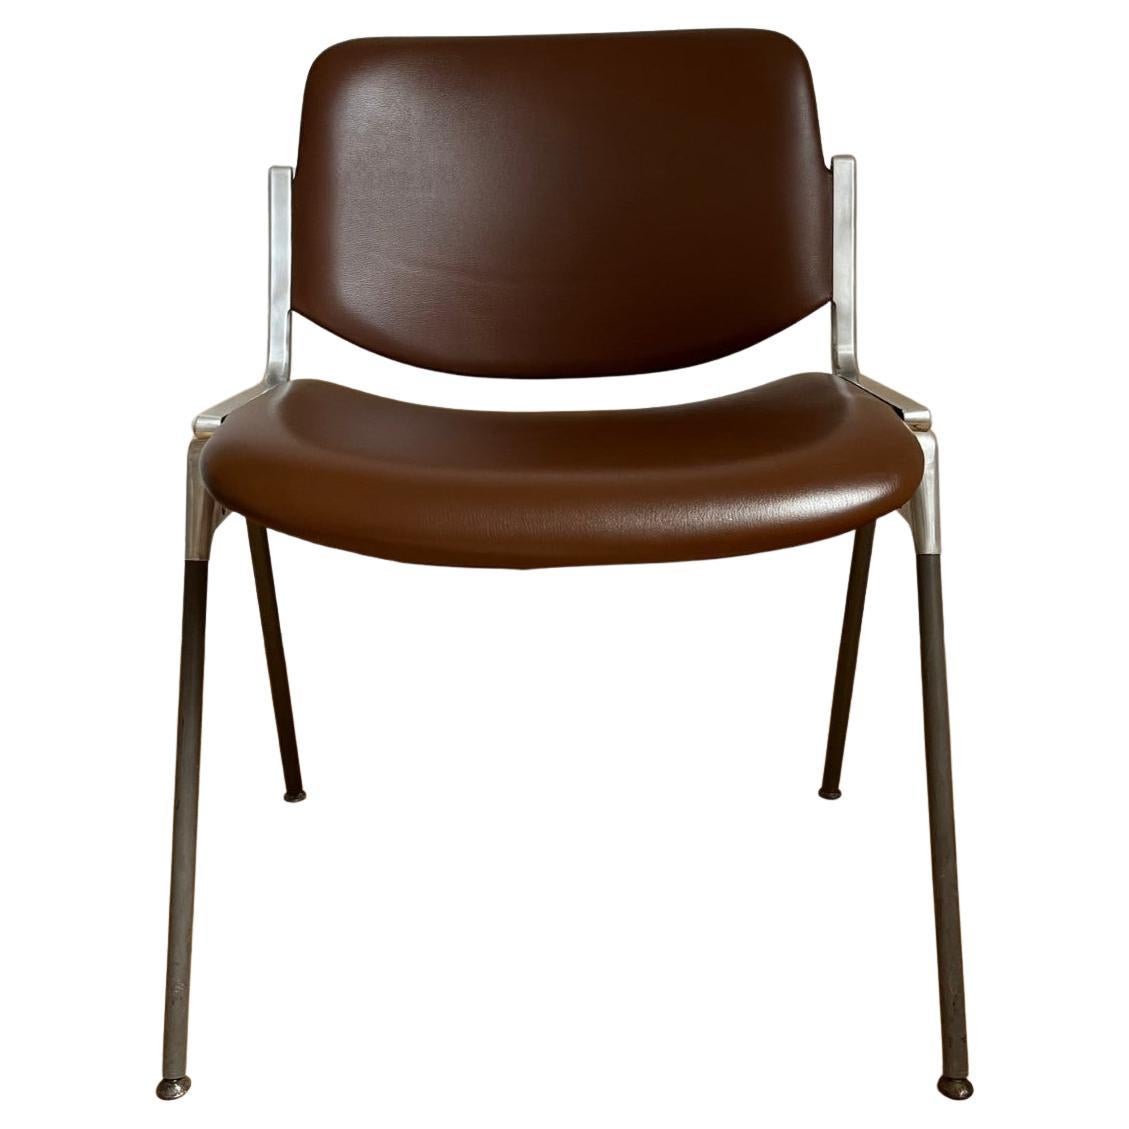 Set of 6 Anonima Castelli Dsc-106 Stacking Leather Chairs by Giancarlo Piretti For Sale